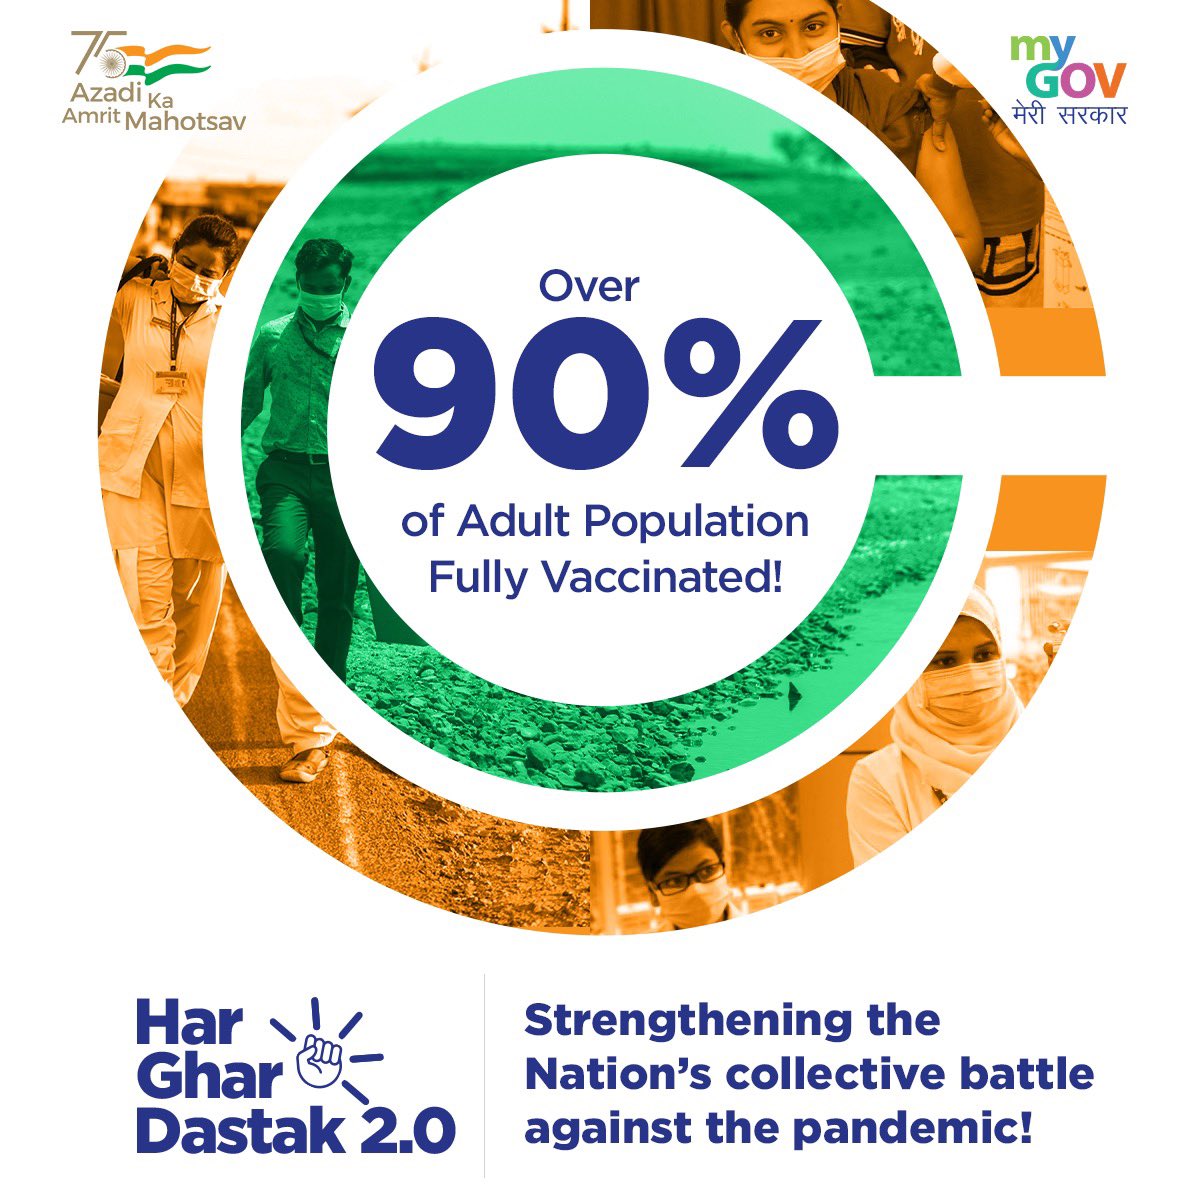 Over 90% of India's Adult Population Fully Vaccinated!!

👉Pace of immunisation in India🇮🇳 has accelerated significantly as a result of technology.

Gratitudes to our Health workers for ensuring safety of people by speeding up COVID vaccination campaign under #HarGharDastak 2.0🙏